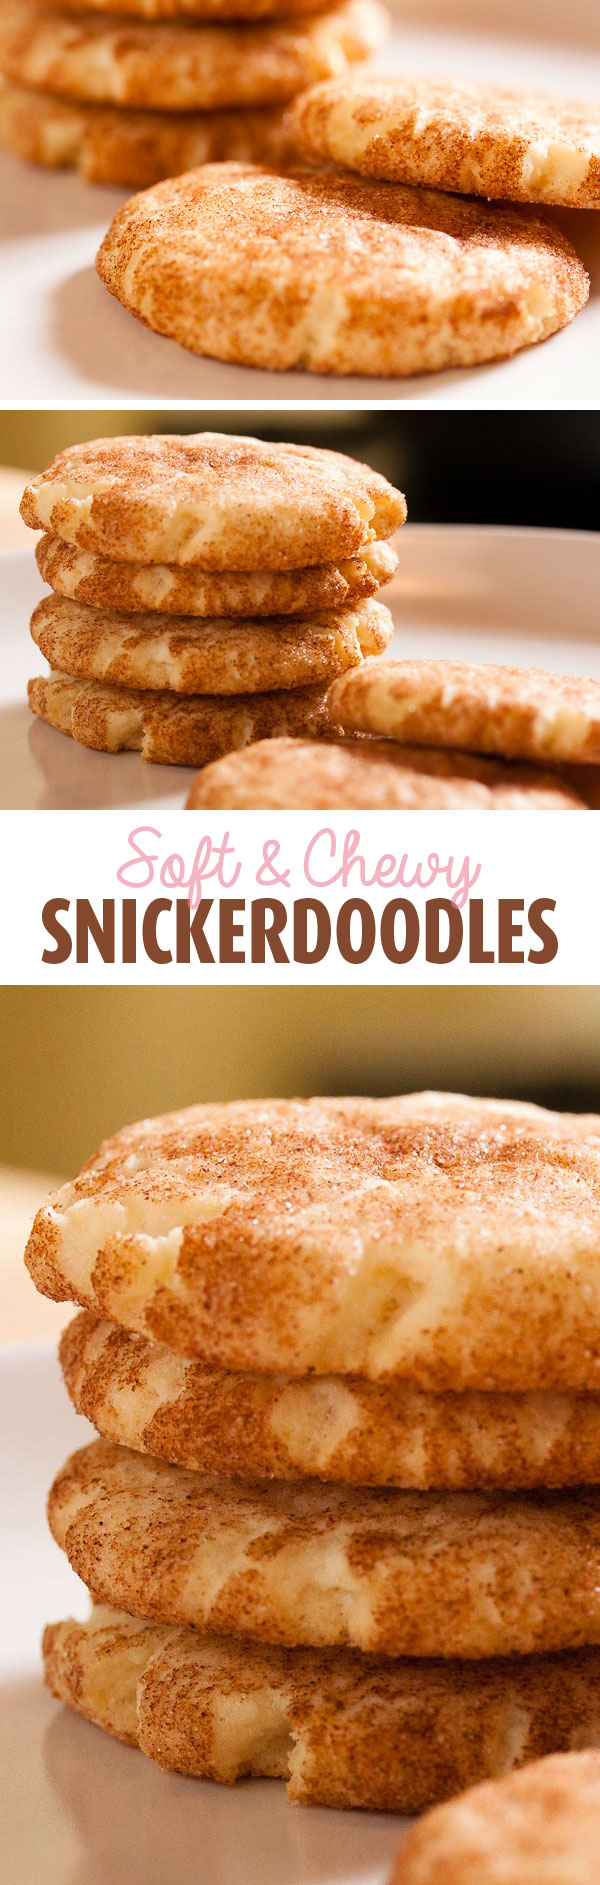 Soft, chewy, and cinnamon-y. Most of my coworkers had never heard of Snickerdoodles before, but now the recipe gets requested a lot!